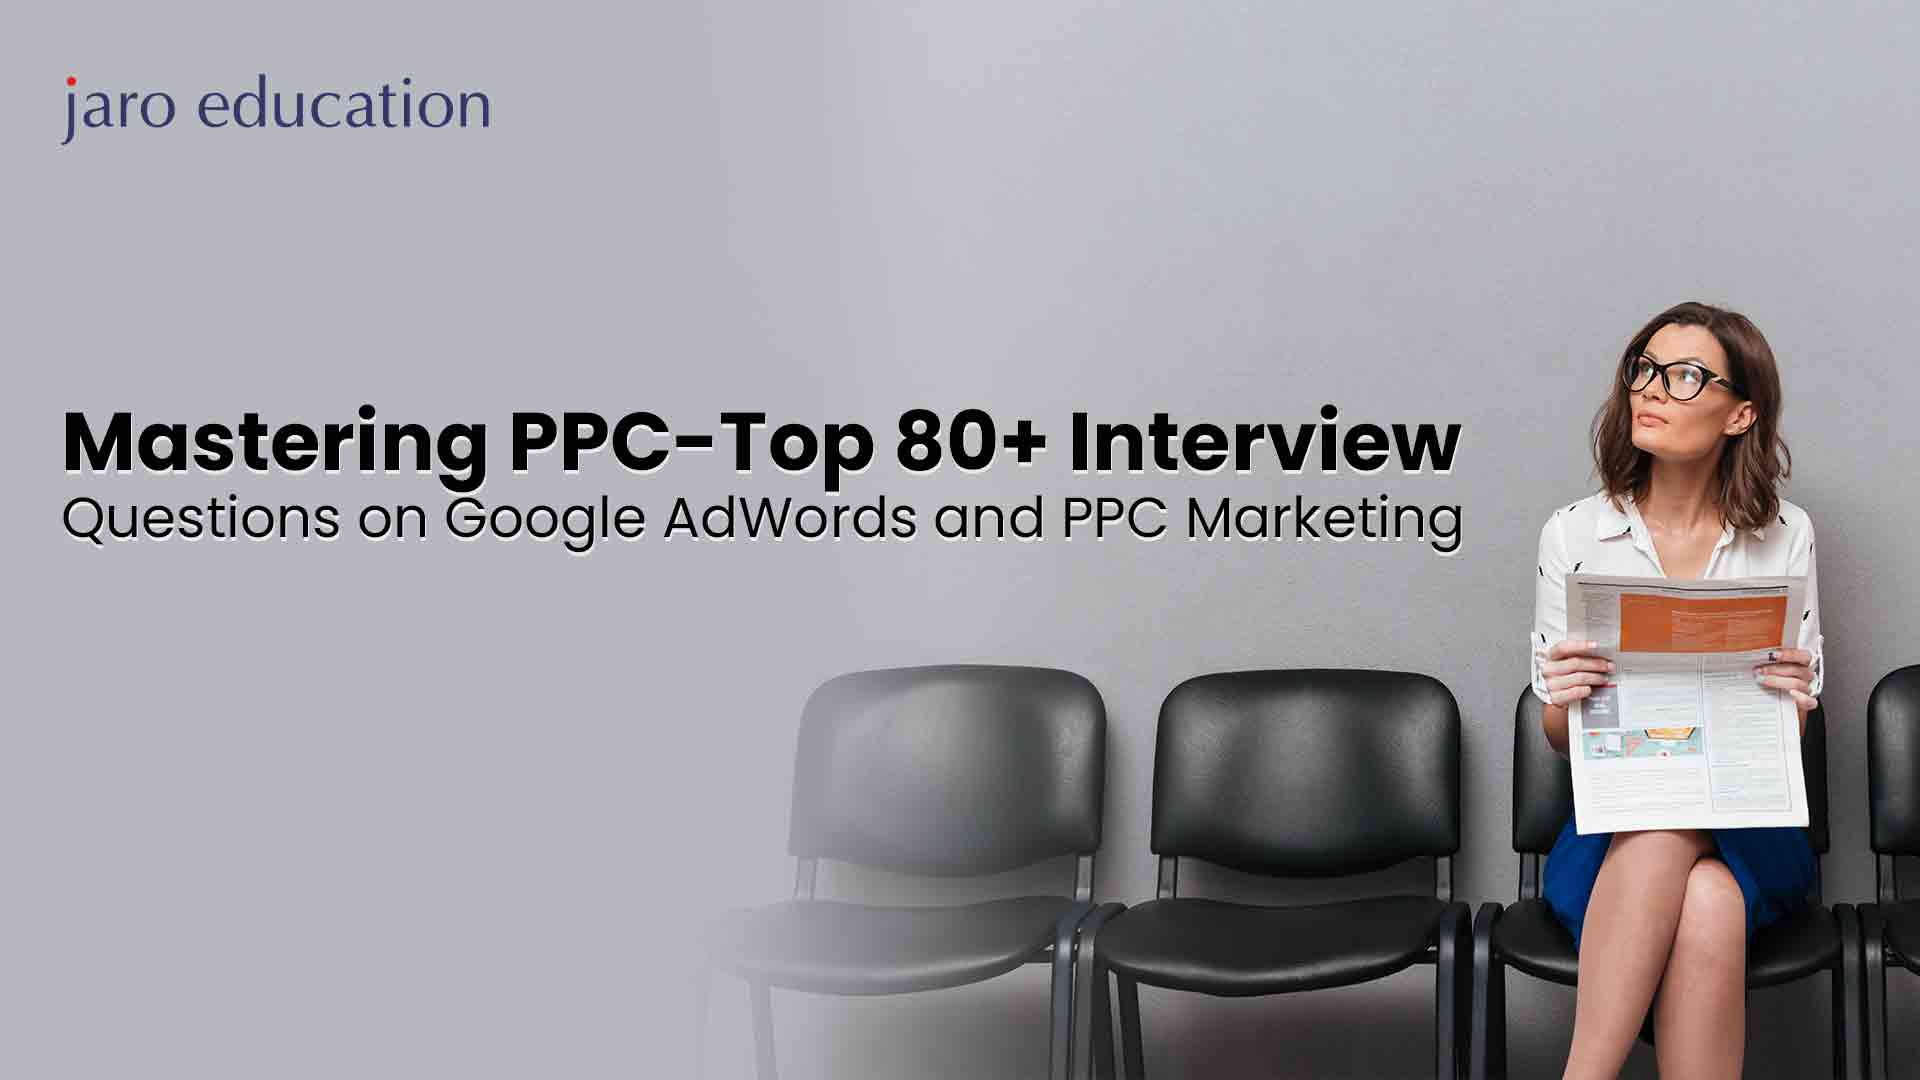 Mastering PPC Top 80+ Interview Questions on Google AdWords and PPC Marketing